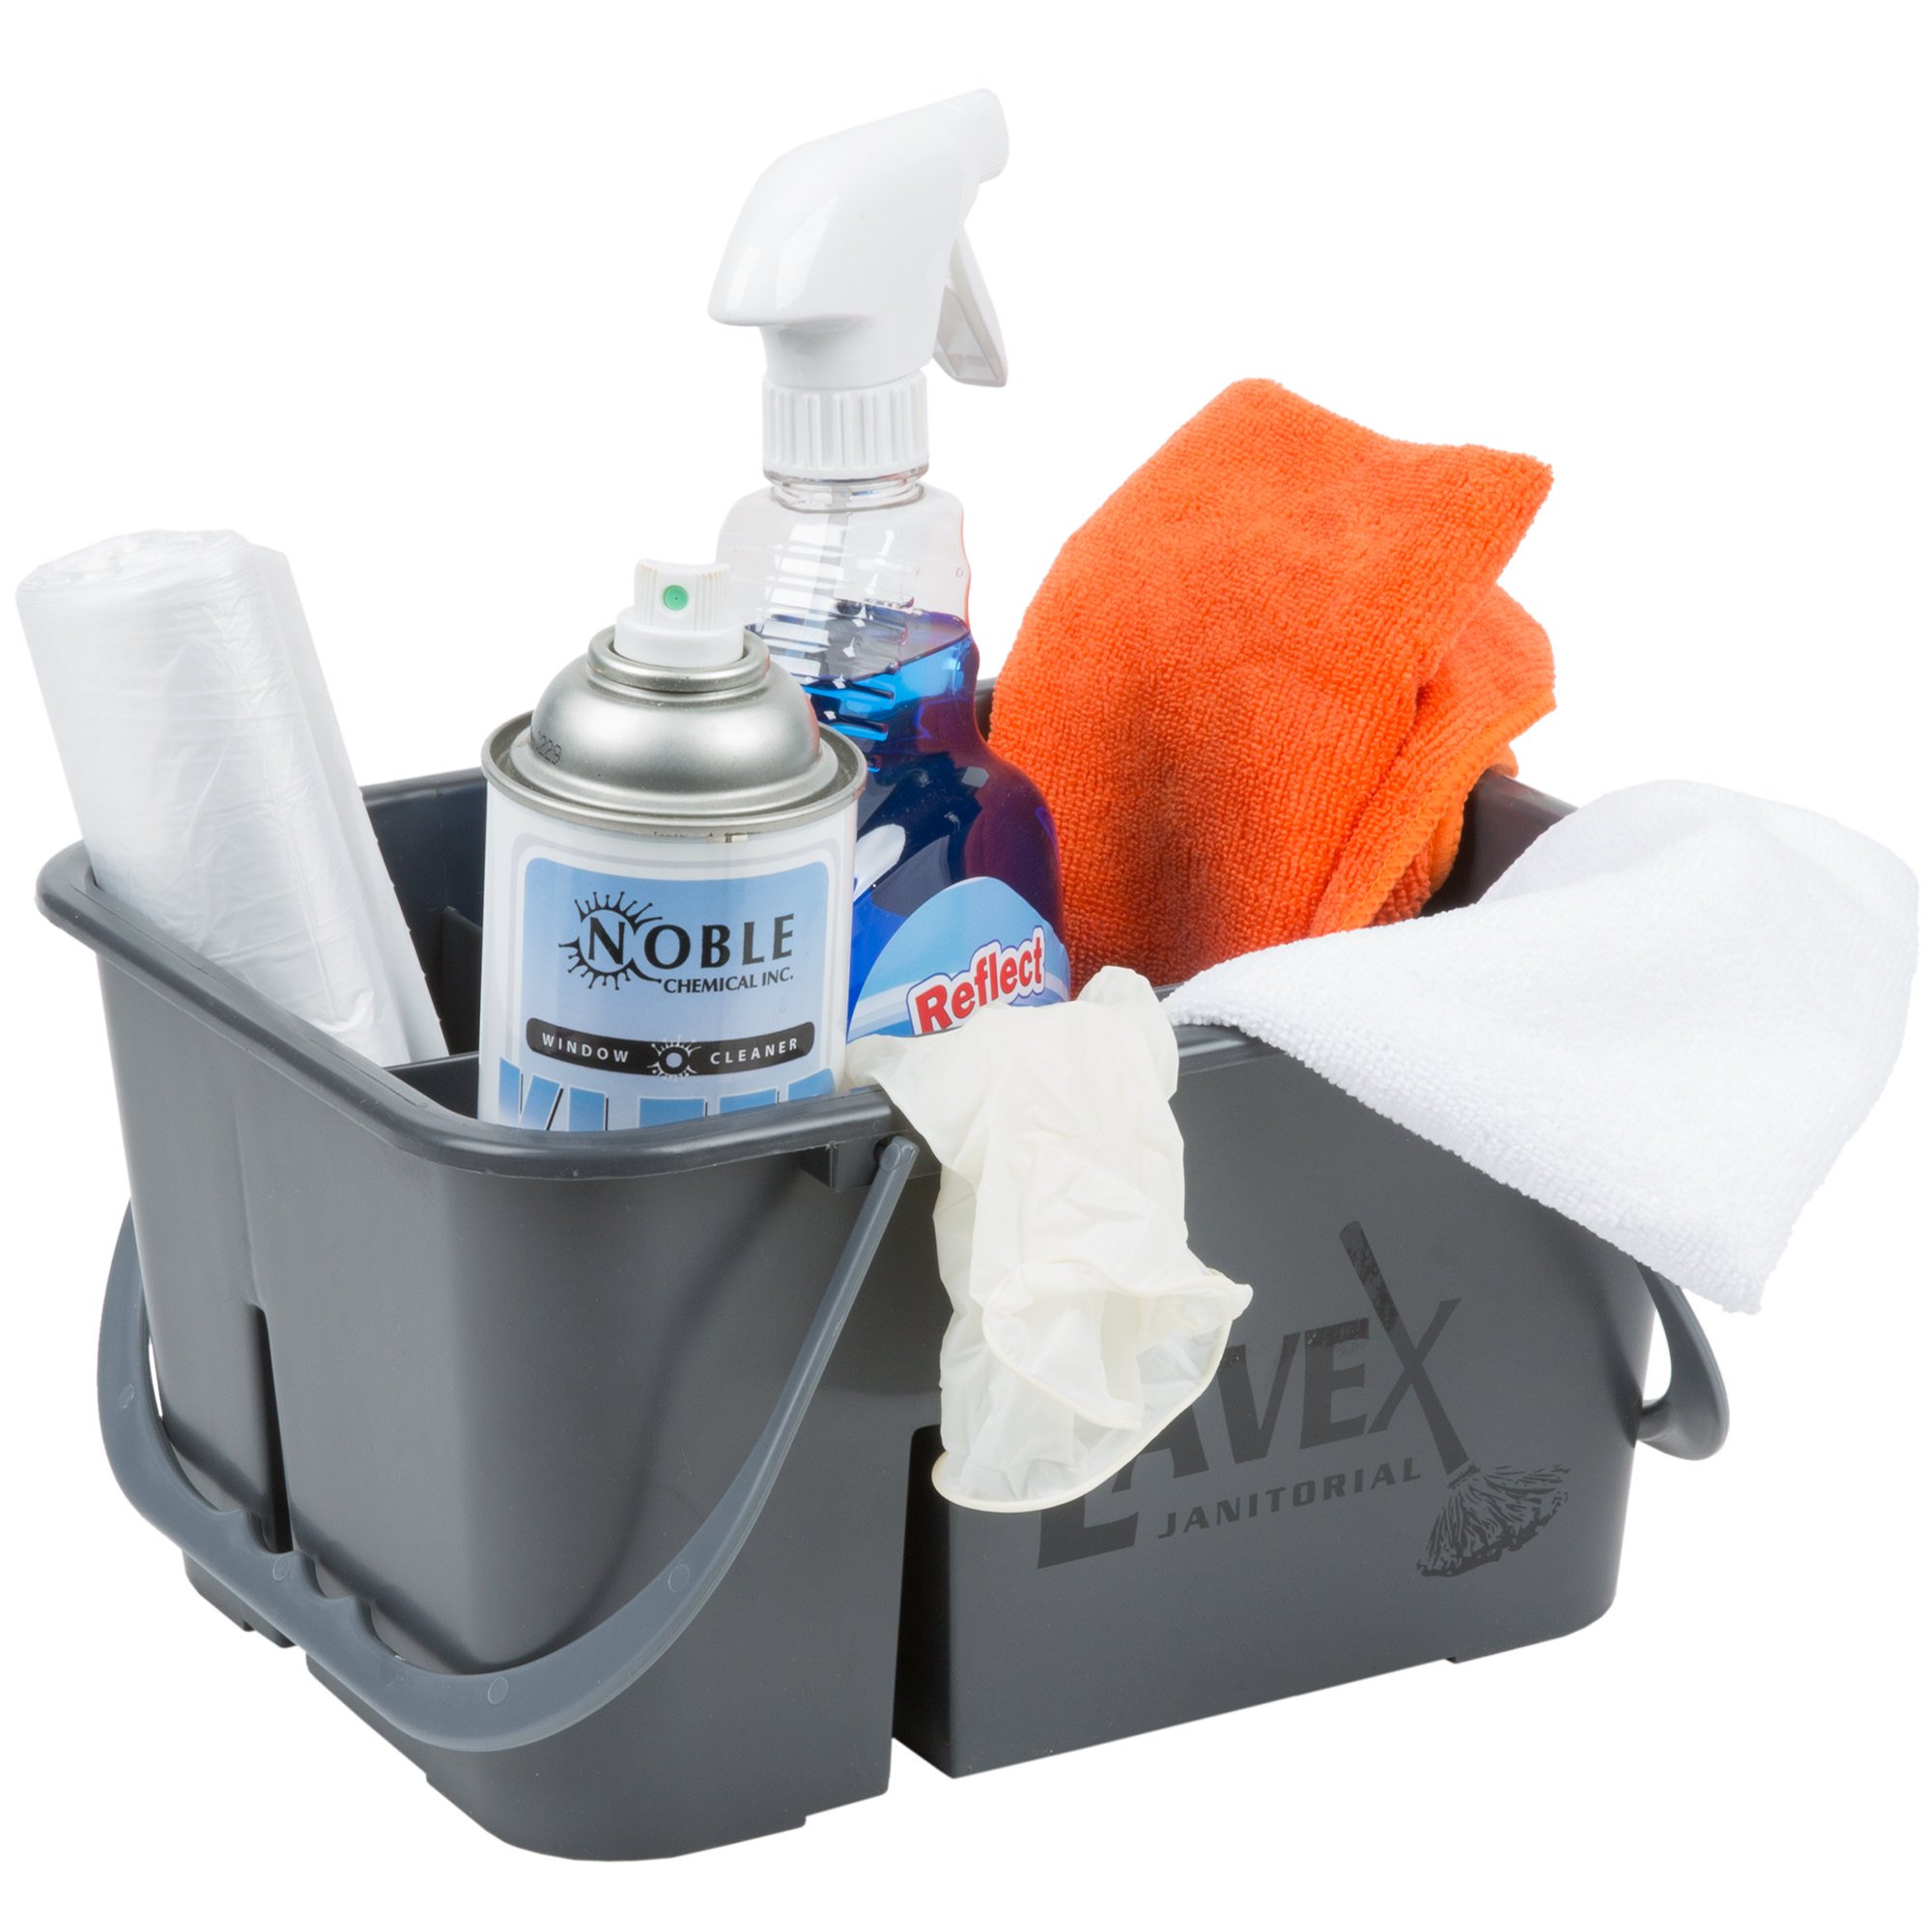 4 COMPARTMENT GRAY JANITORIAL  PASTIC CADDY, PLASTIC 11.5Lx9W 